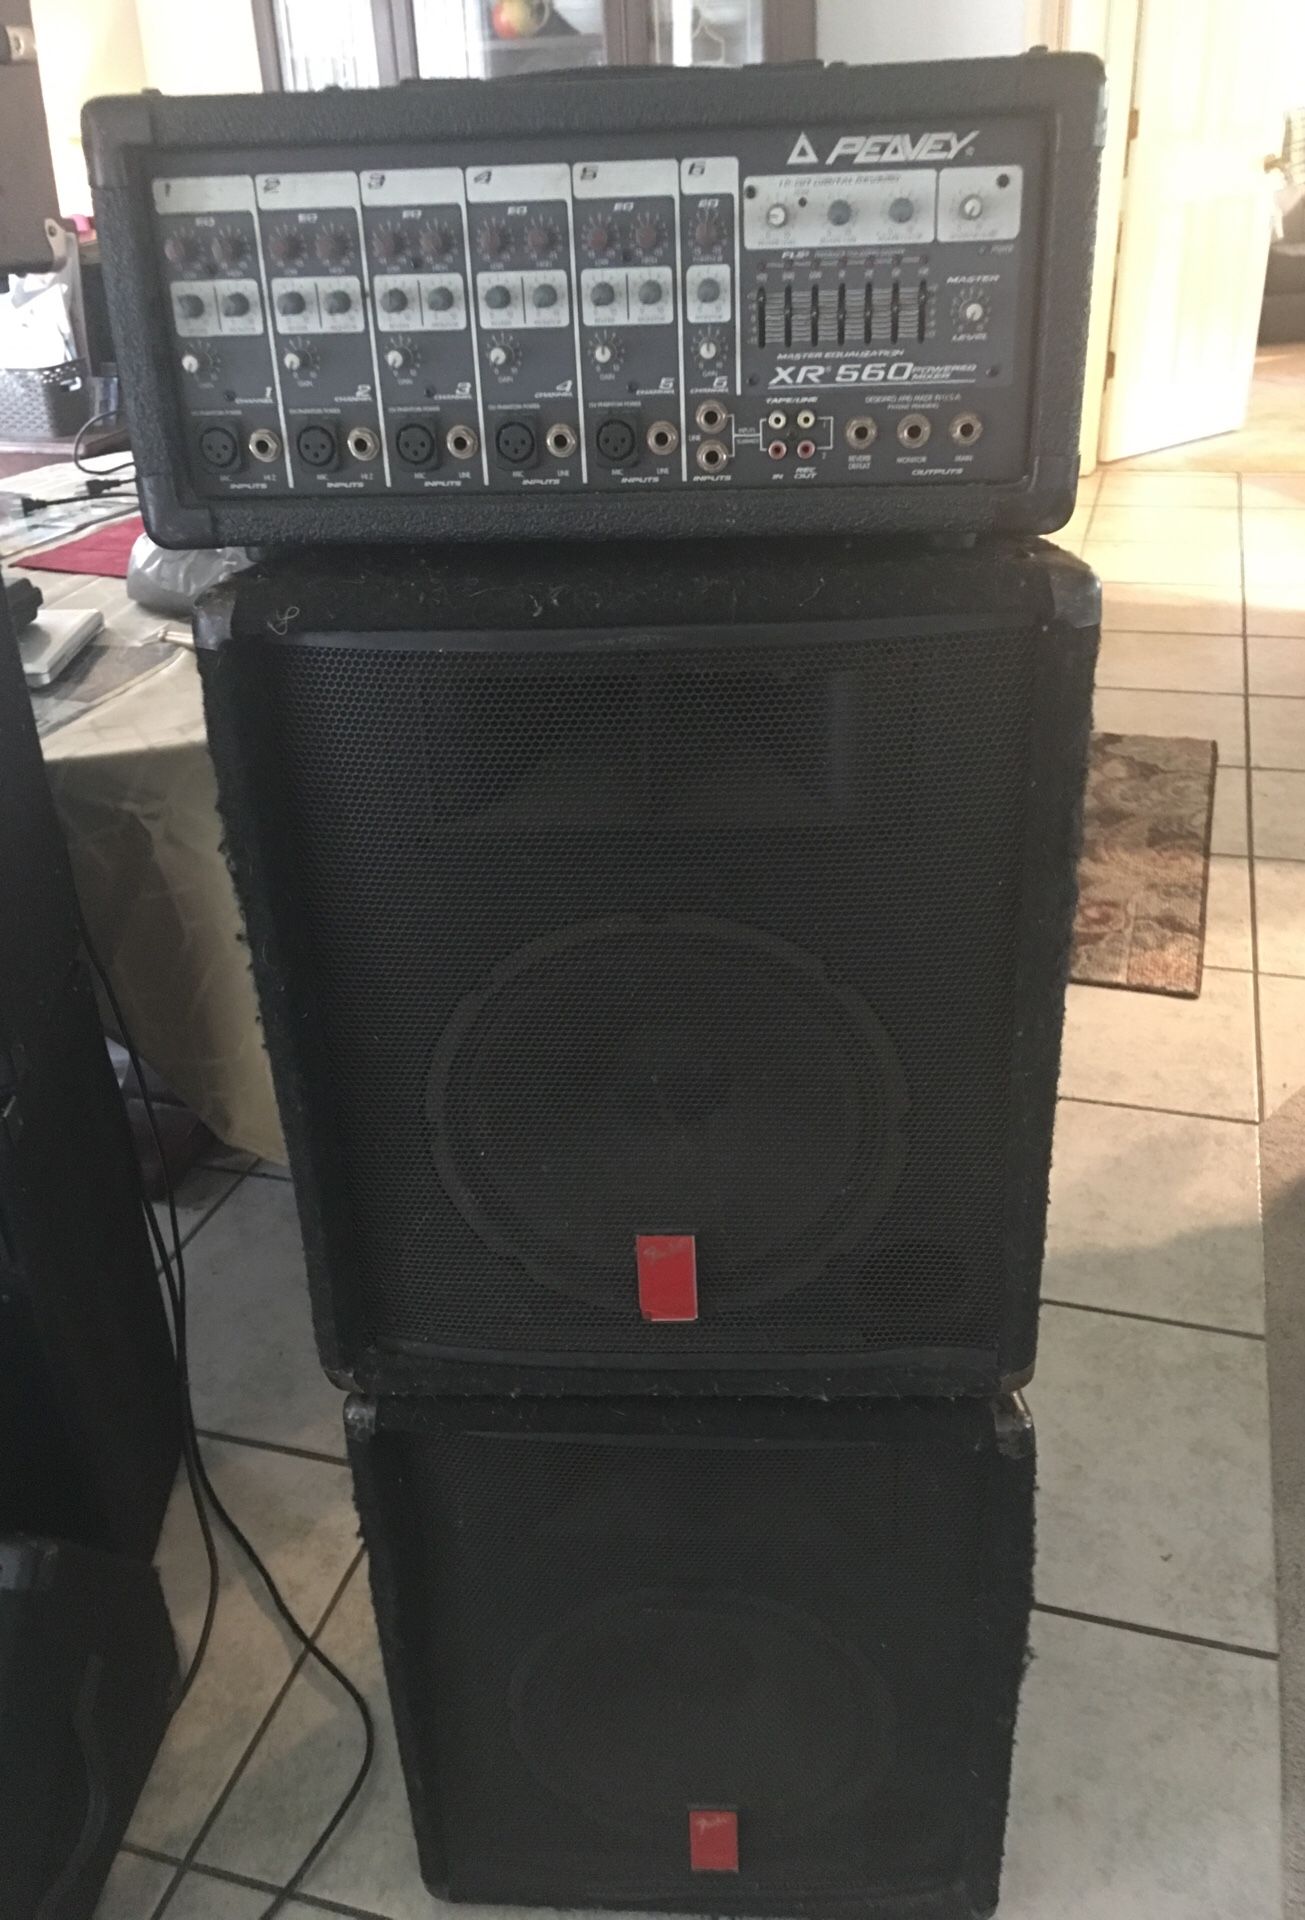 Fender pa speakers and a peavey powered mixer.